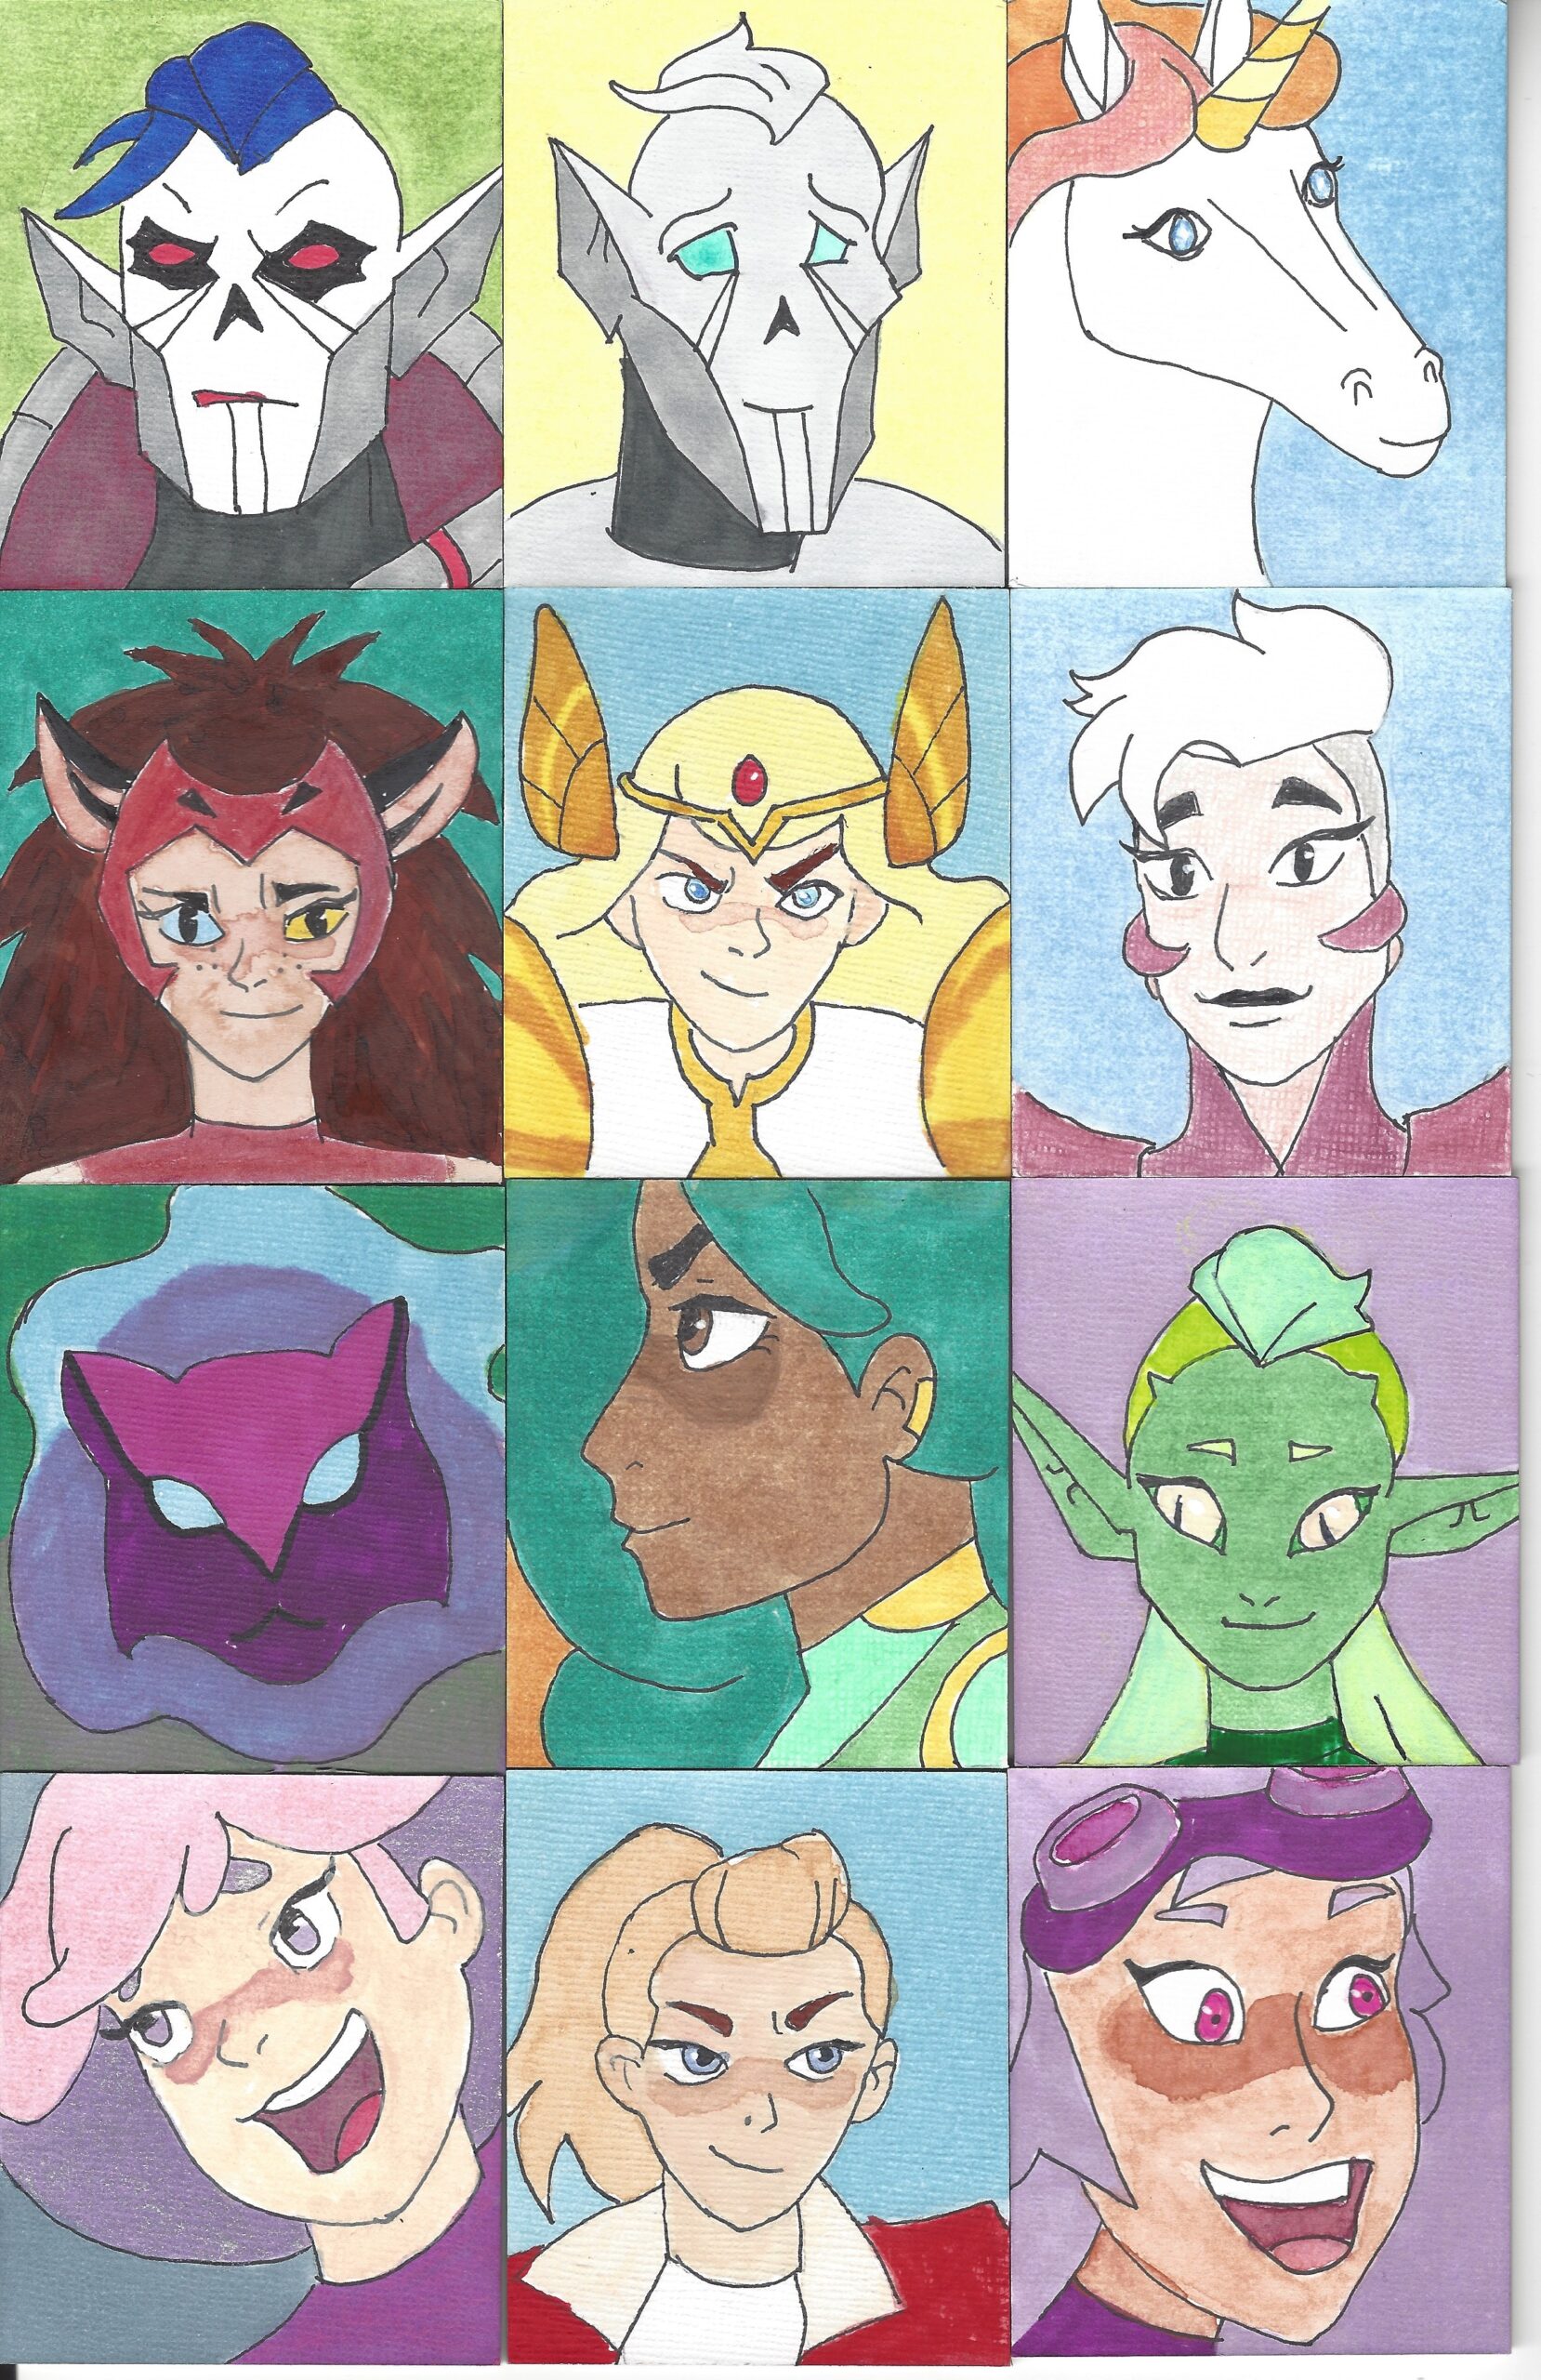 She-Ra and the Princesses of Power fan art magnets by Wendy Sheridan